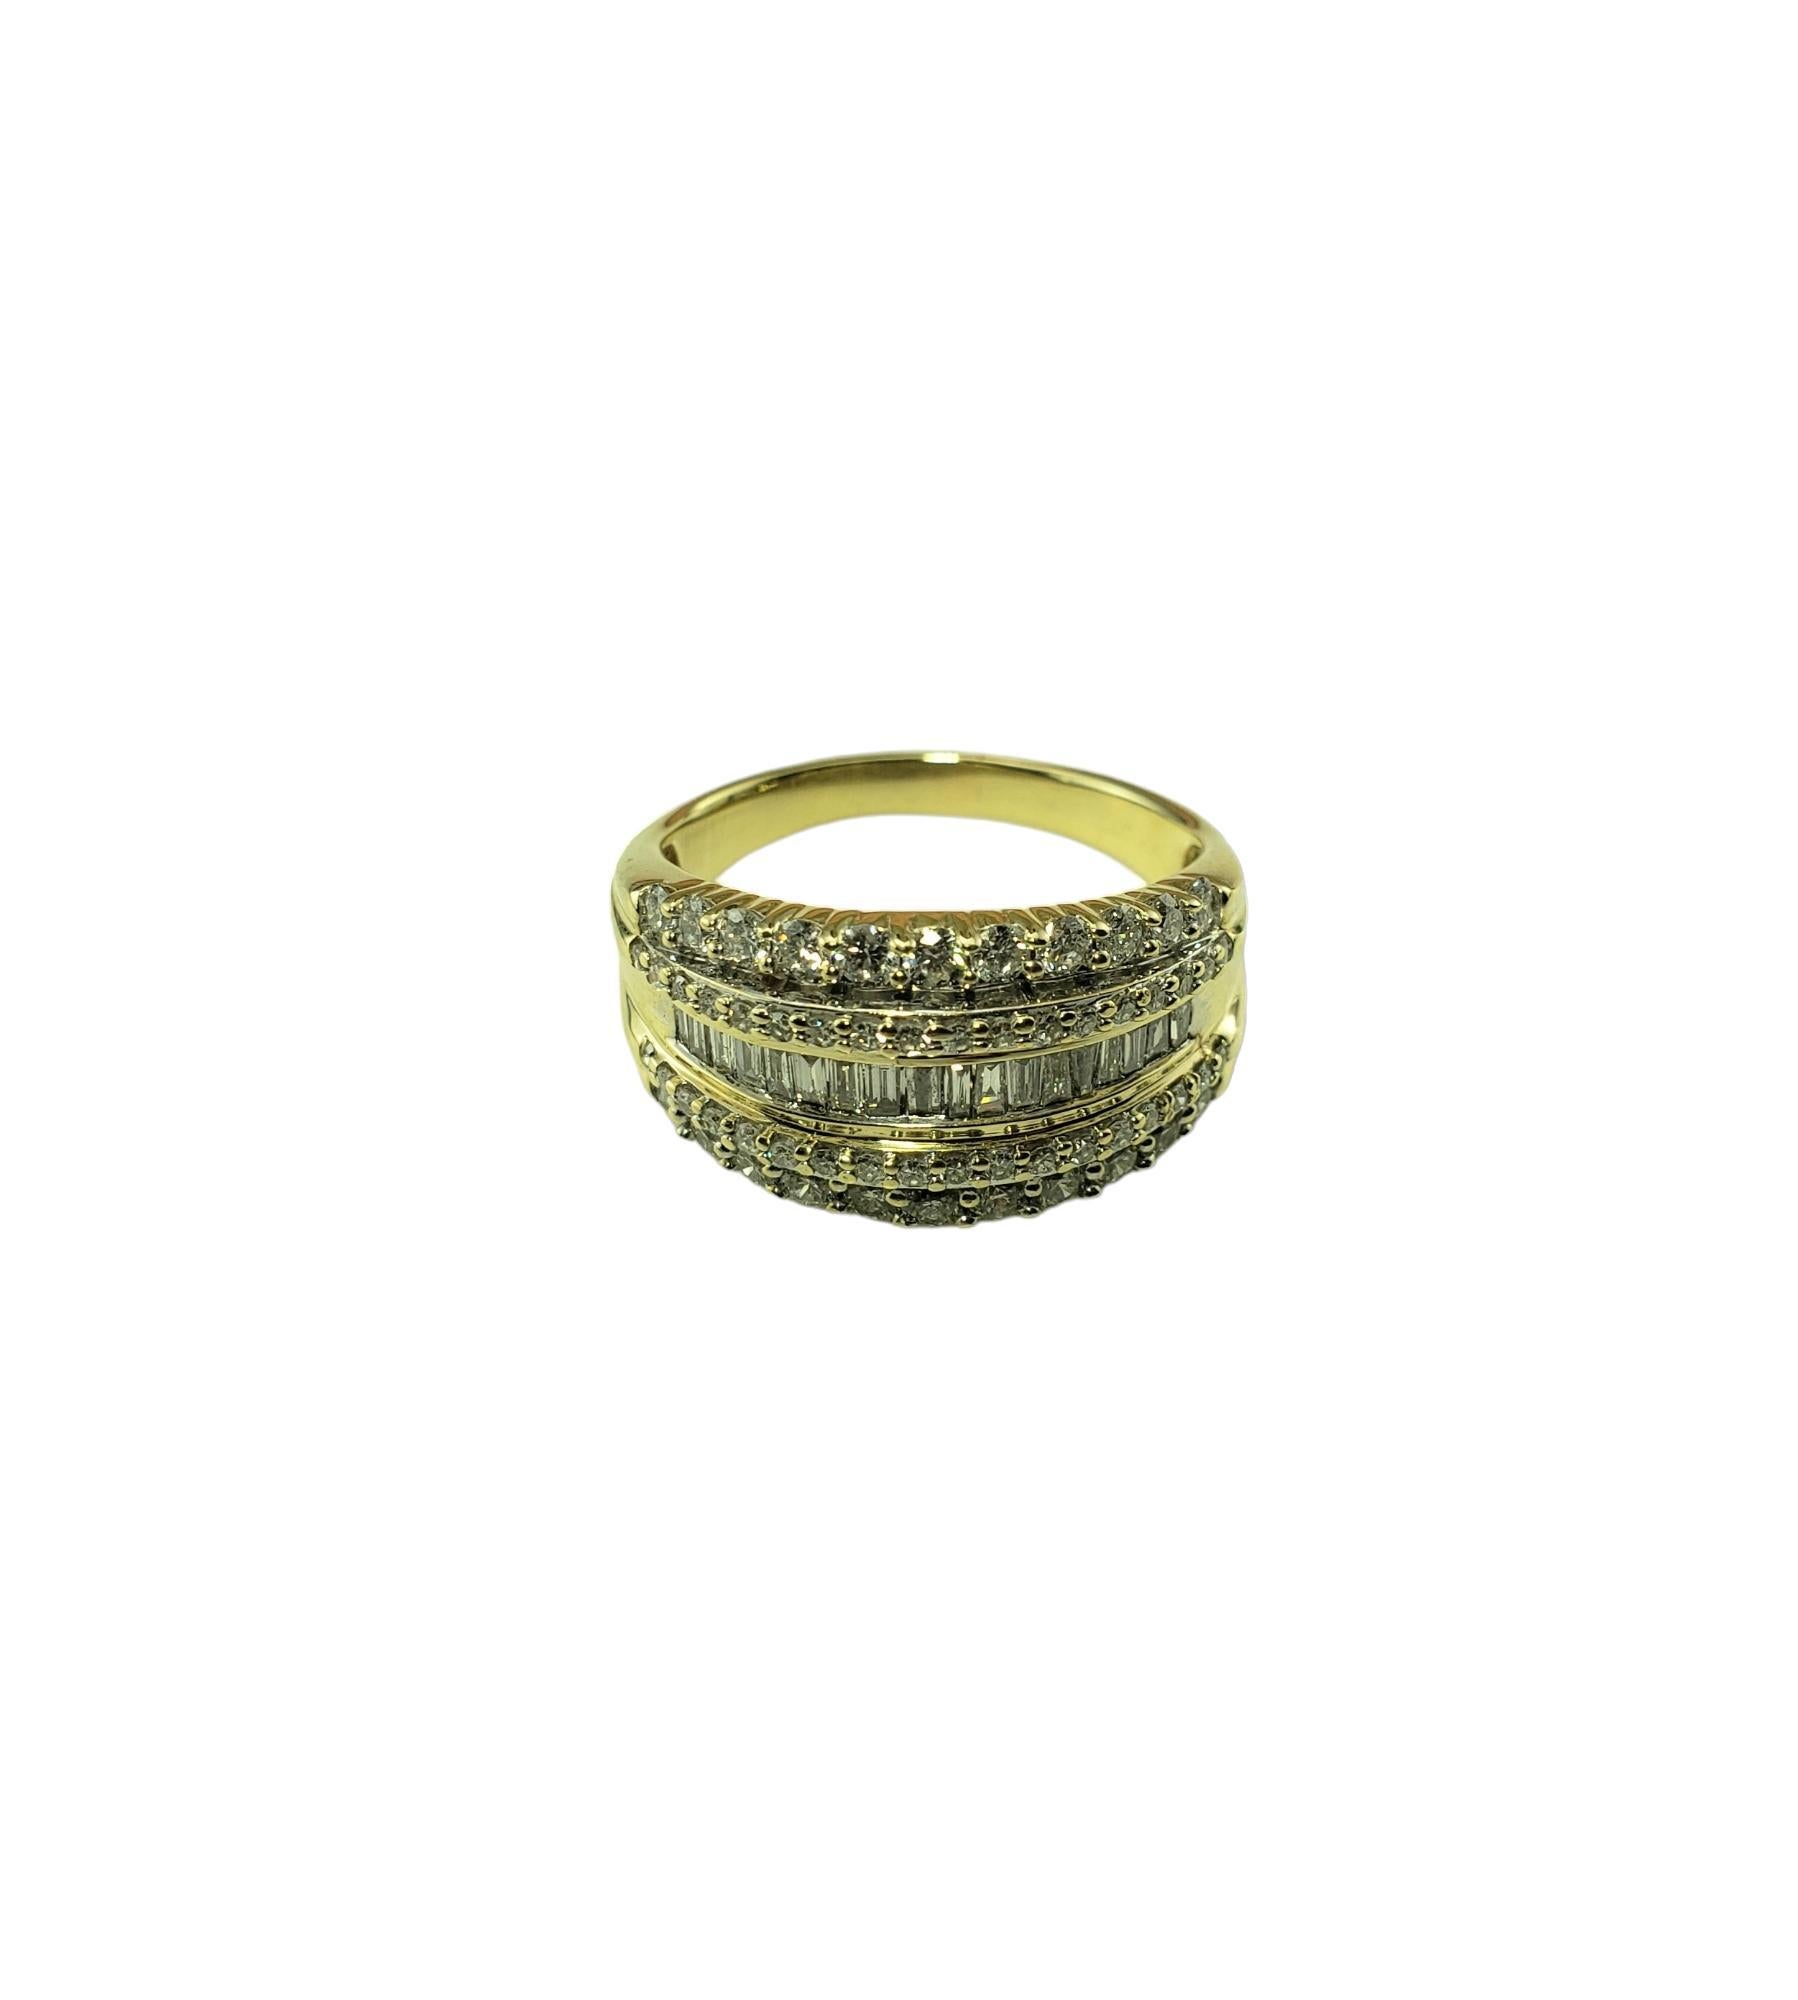 Vintage 10K Yellow Gold and Diamond Band Ring Size 7.5 JAGi Certified-

This sparkling band features 18 baguette diamonds, 22 round brilliant cut diamonds* and 36 round single cut diamonds set in classic 10K yellow gold. Width:  10.6 mm.  
Shank: